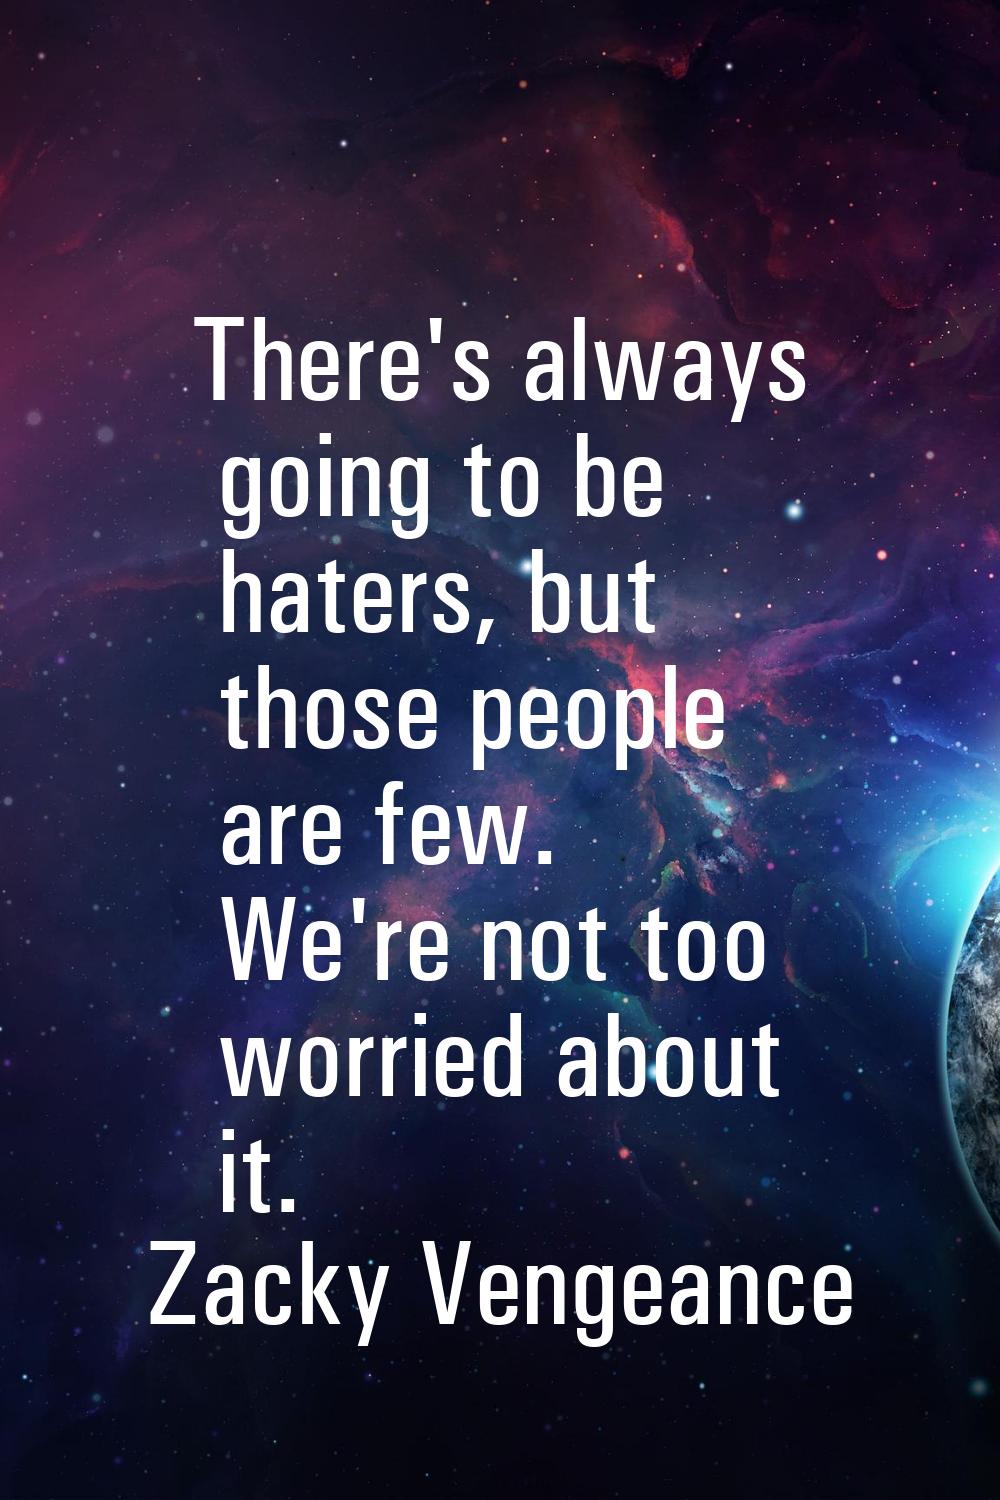 There's always going to be haters, but those people are few. We're not too worried about it.